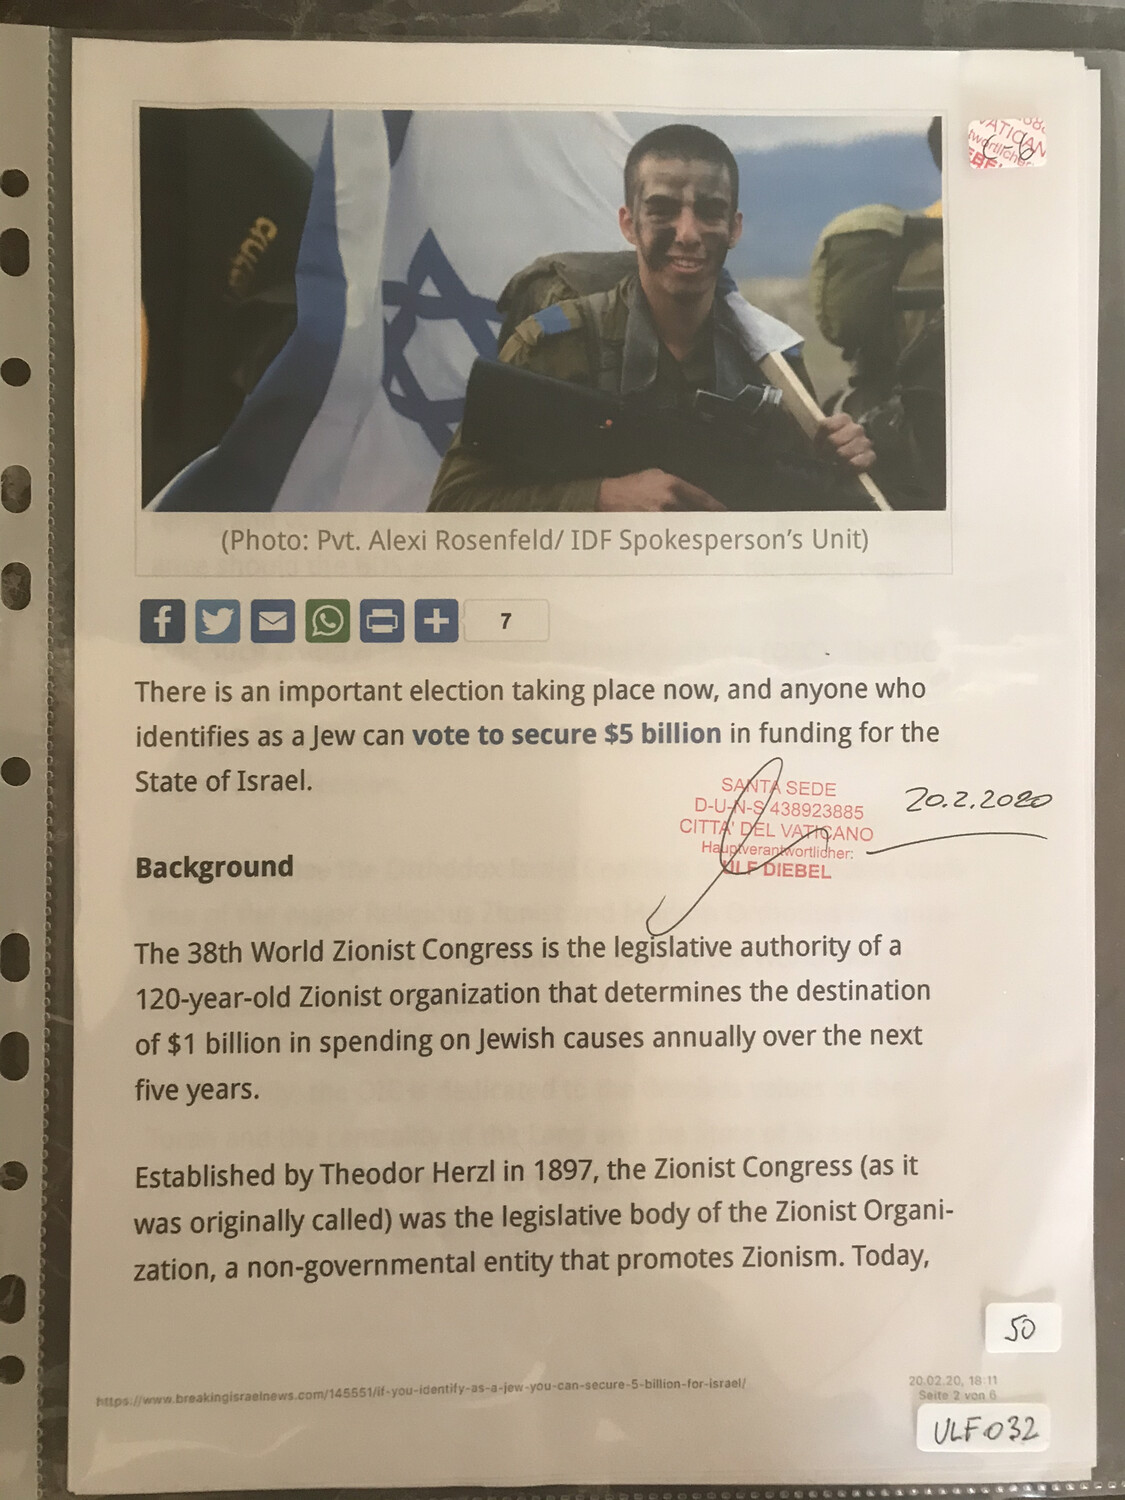 #U032 l BreakingIsraelNews - There is an important election taking place now, and anyone who identifies as a Jew can vote to secure $5 billion in funding for the State of Israel 